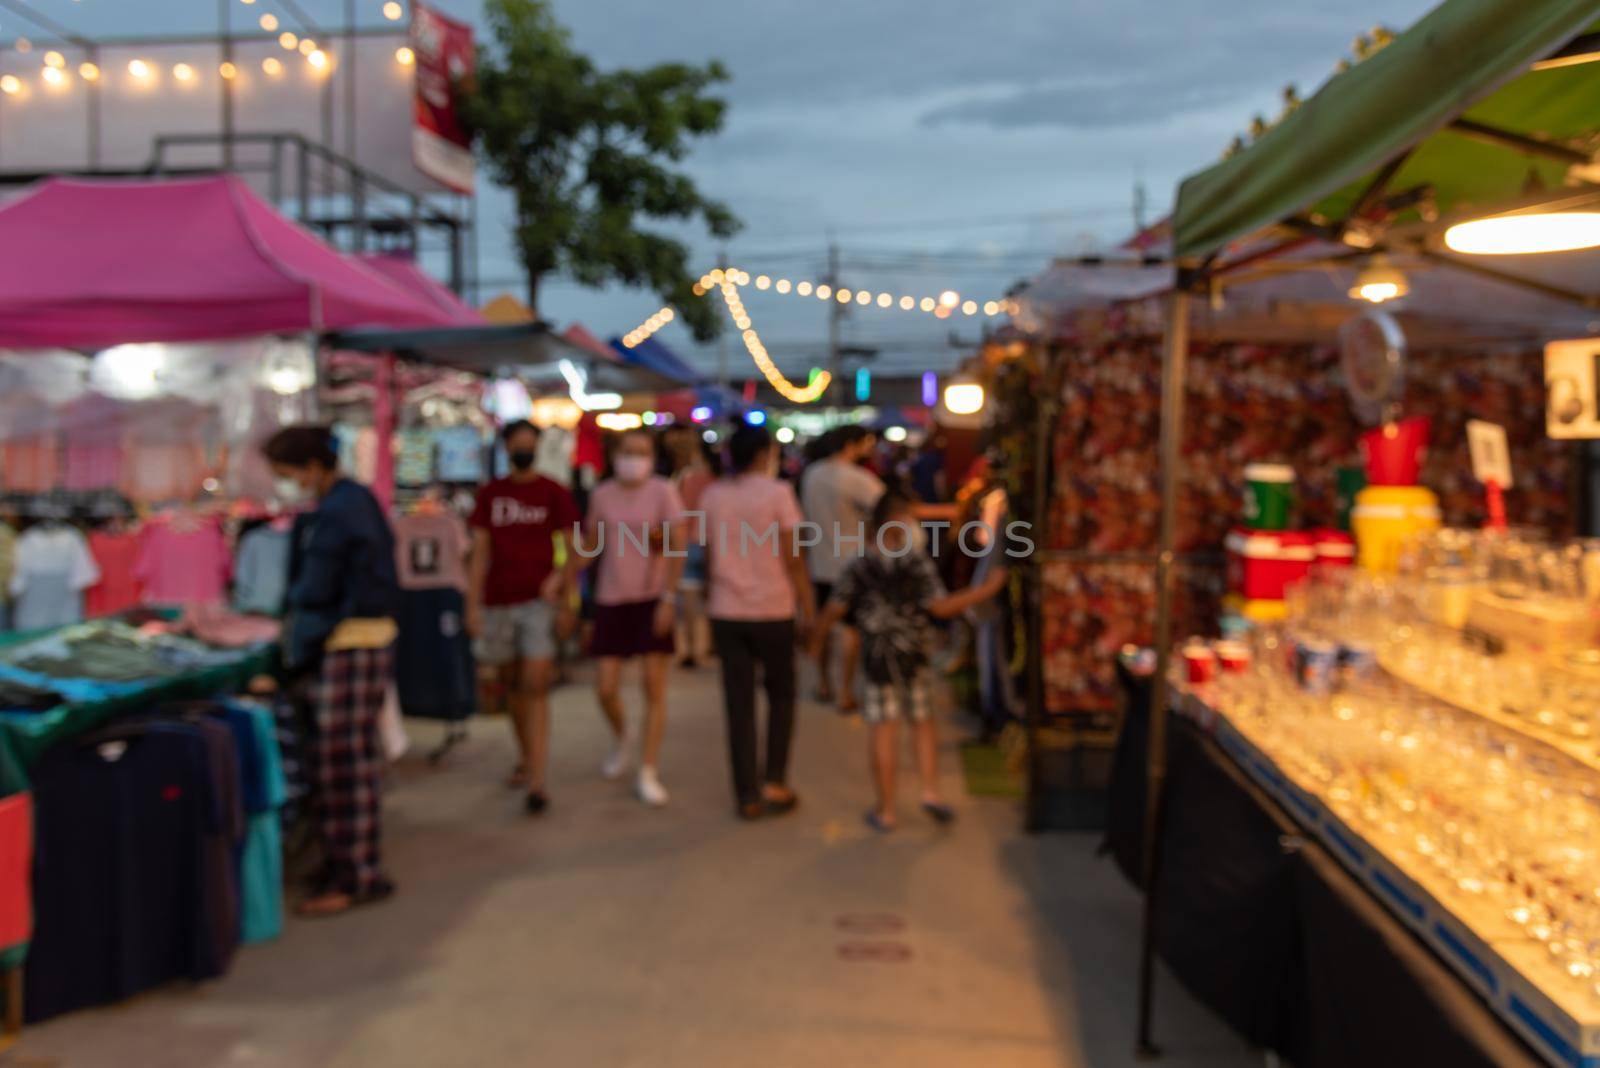 blurred image of night market festival people walking on road with light bokeh for background.